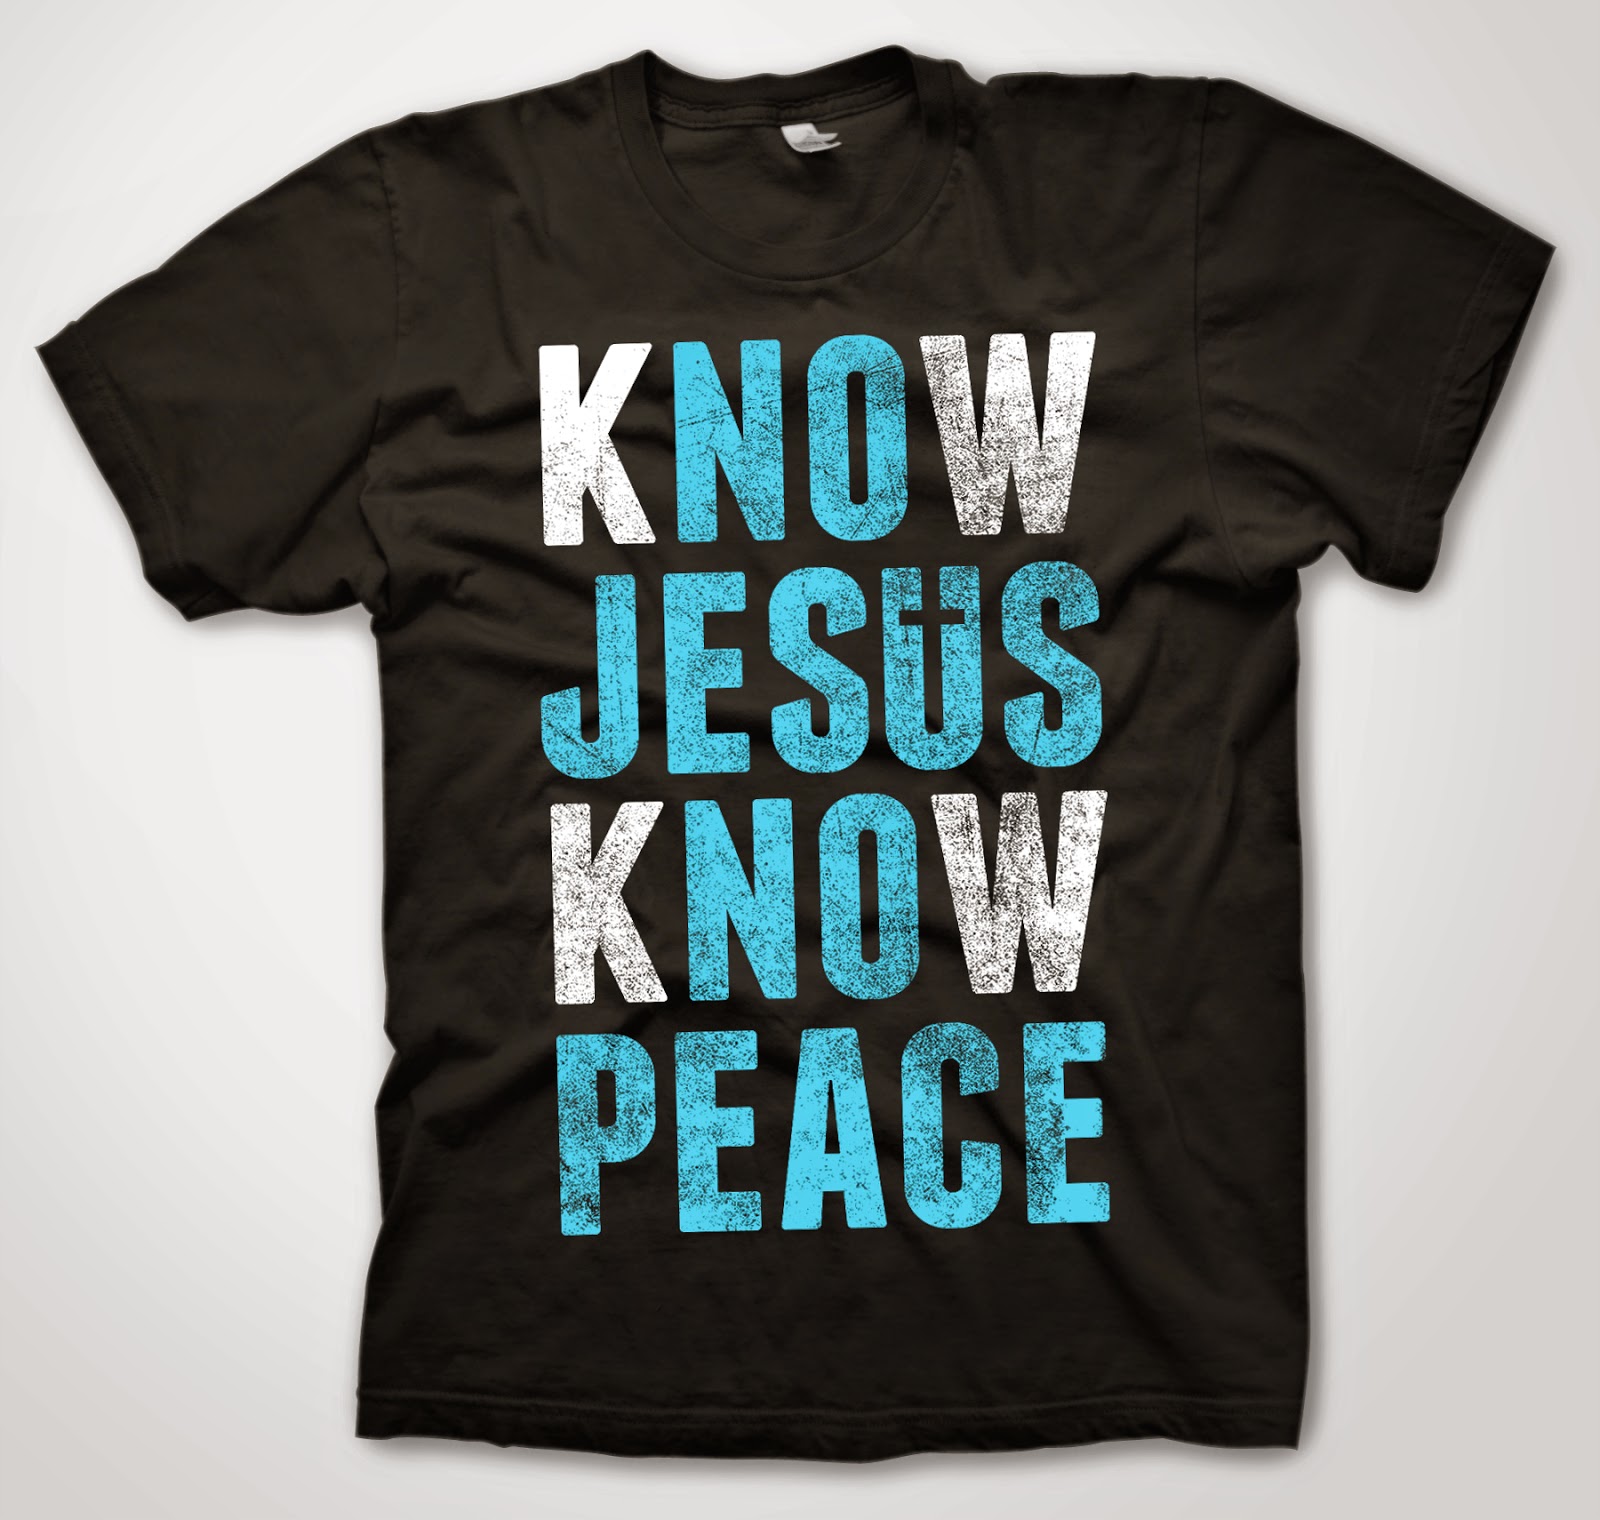 5 Outstanding Christian T-Shirt Designs | Once Upon a Tee